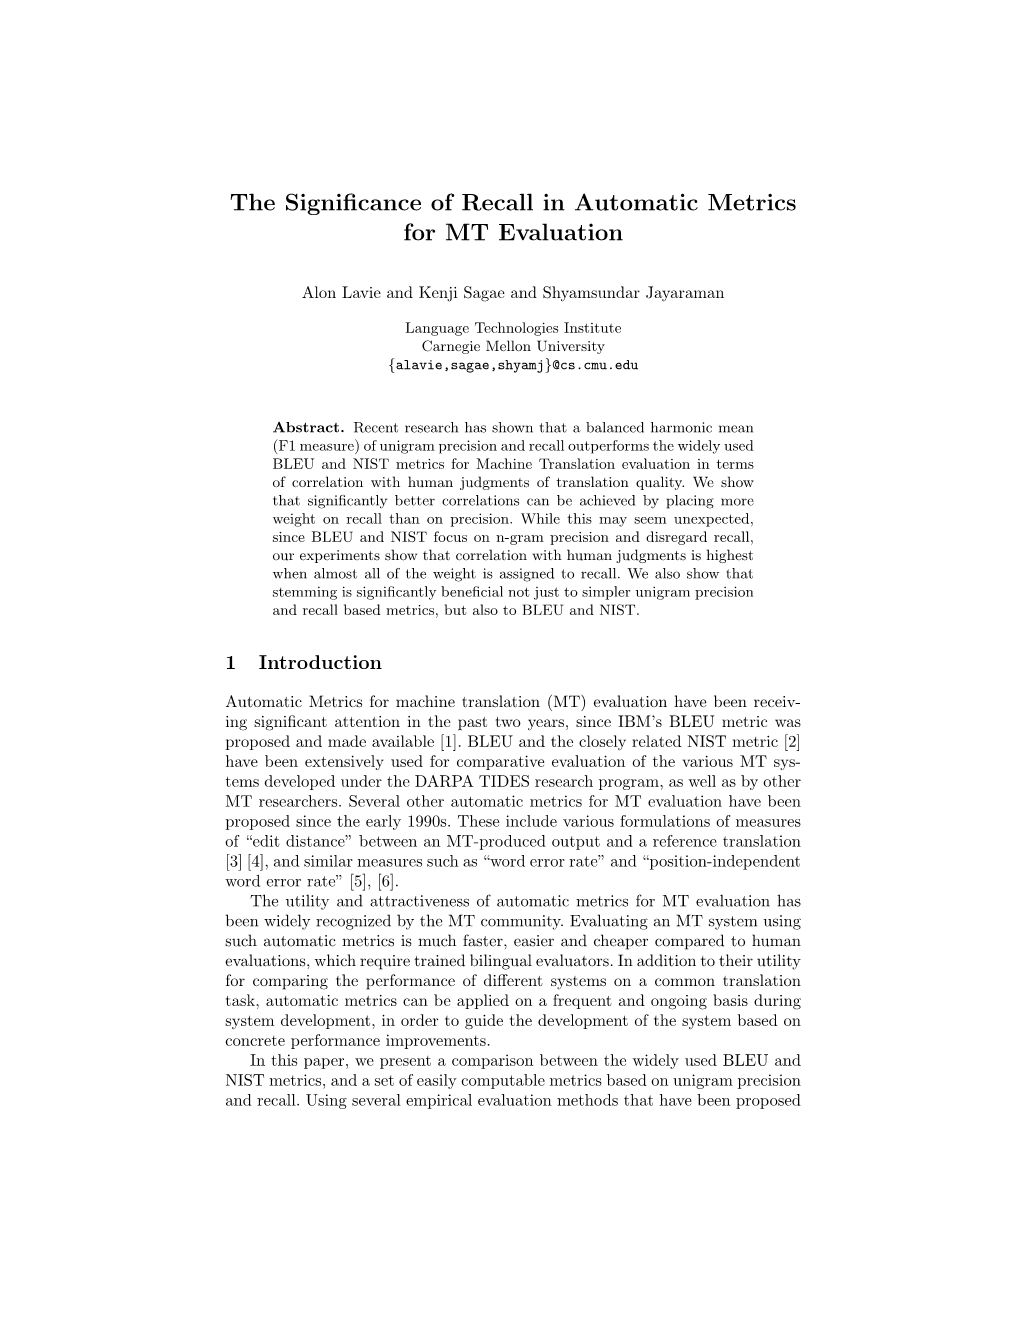 The Significance of Recall in Automatic Metrics for MT Evaluation